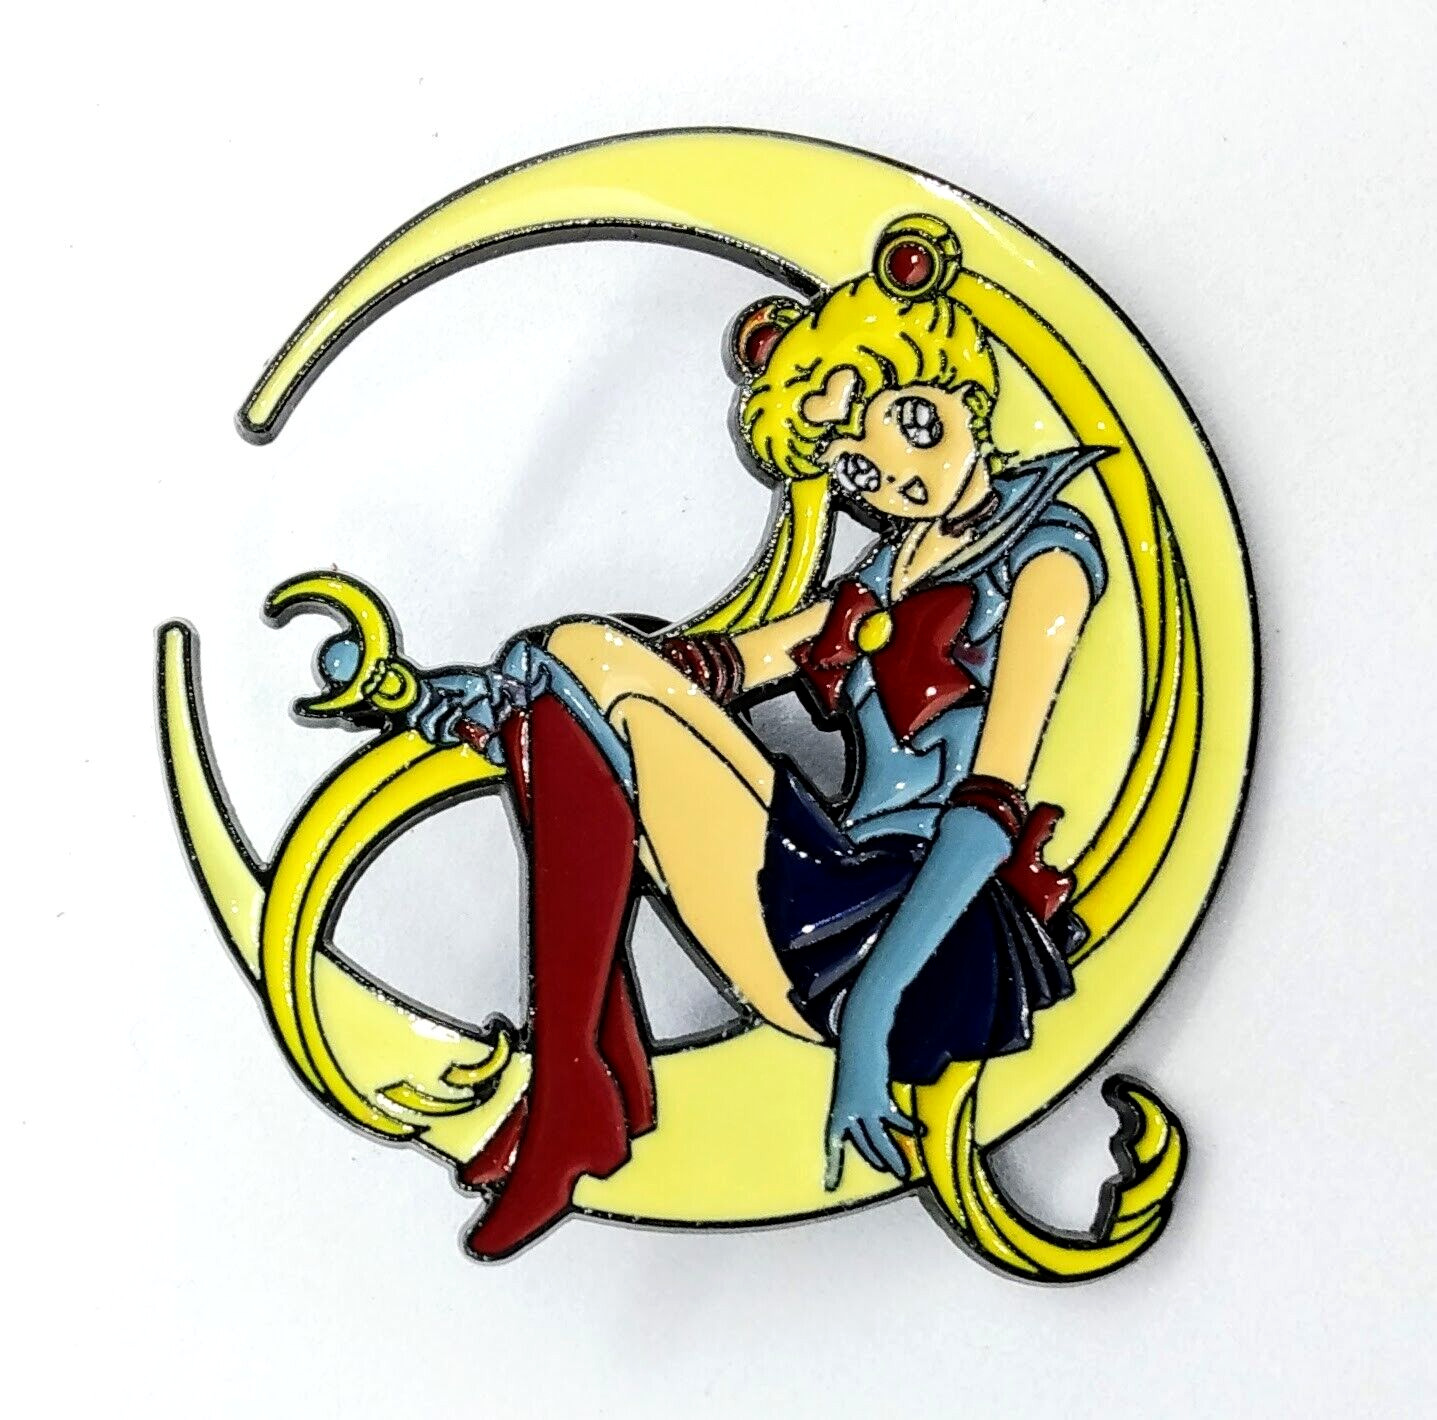 SAILOR MOON PIN Large Crescent Moon Girl's Enamel Brooch Anime (Great Gift)